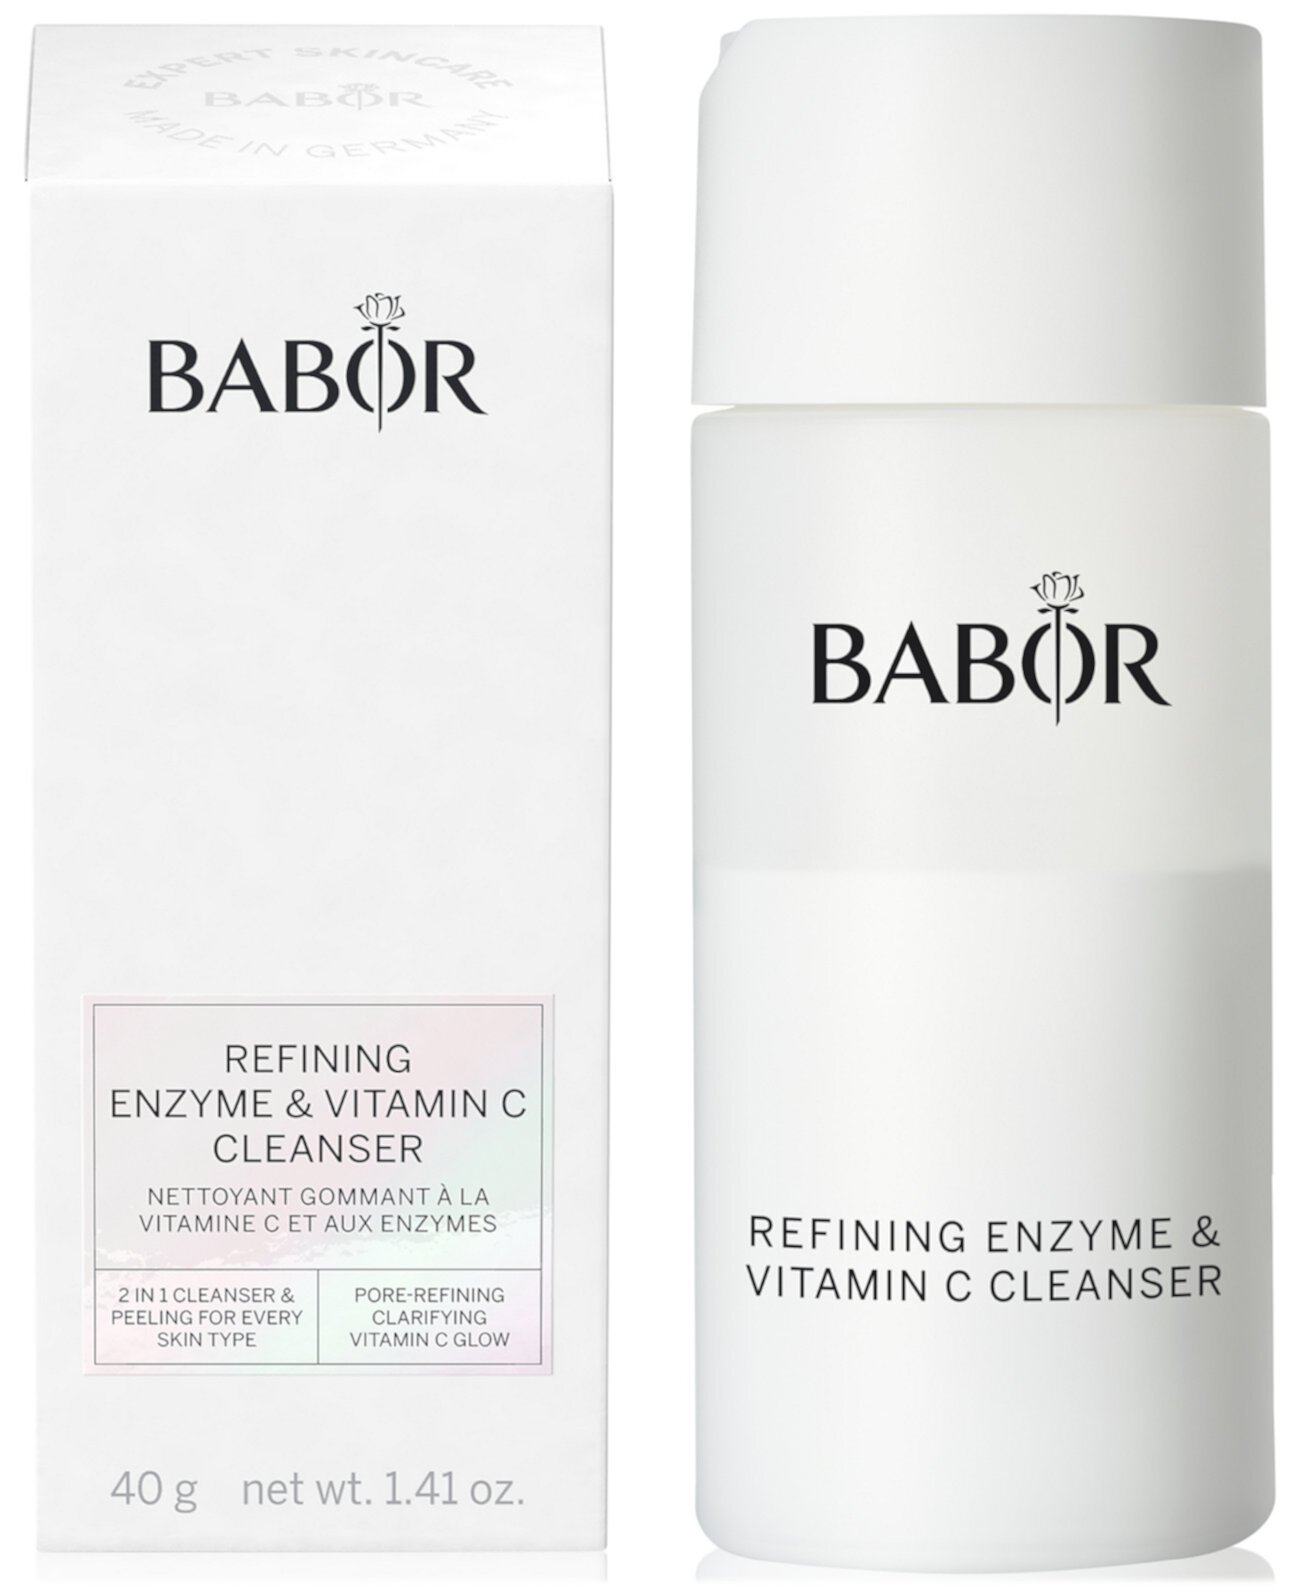 Refining Enzyme & Vitamin C Cleanser, 1.41 oz. BABOR